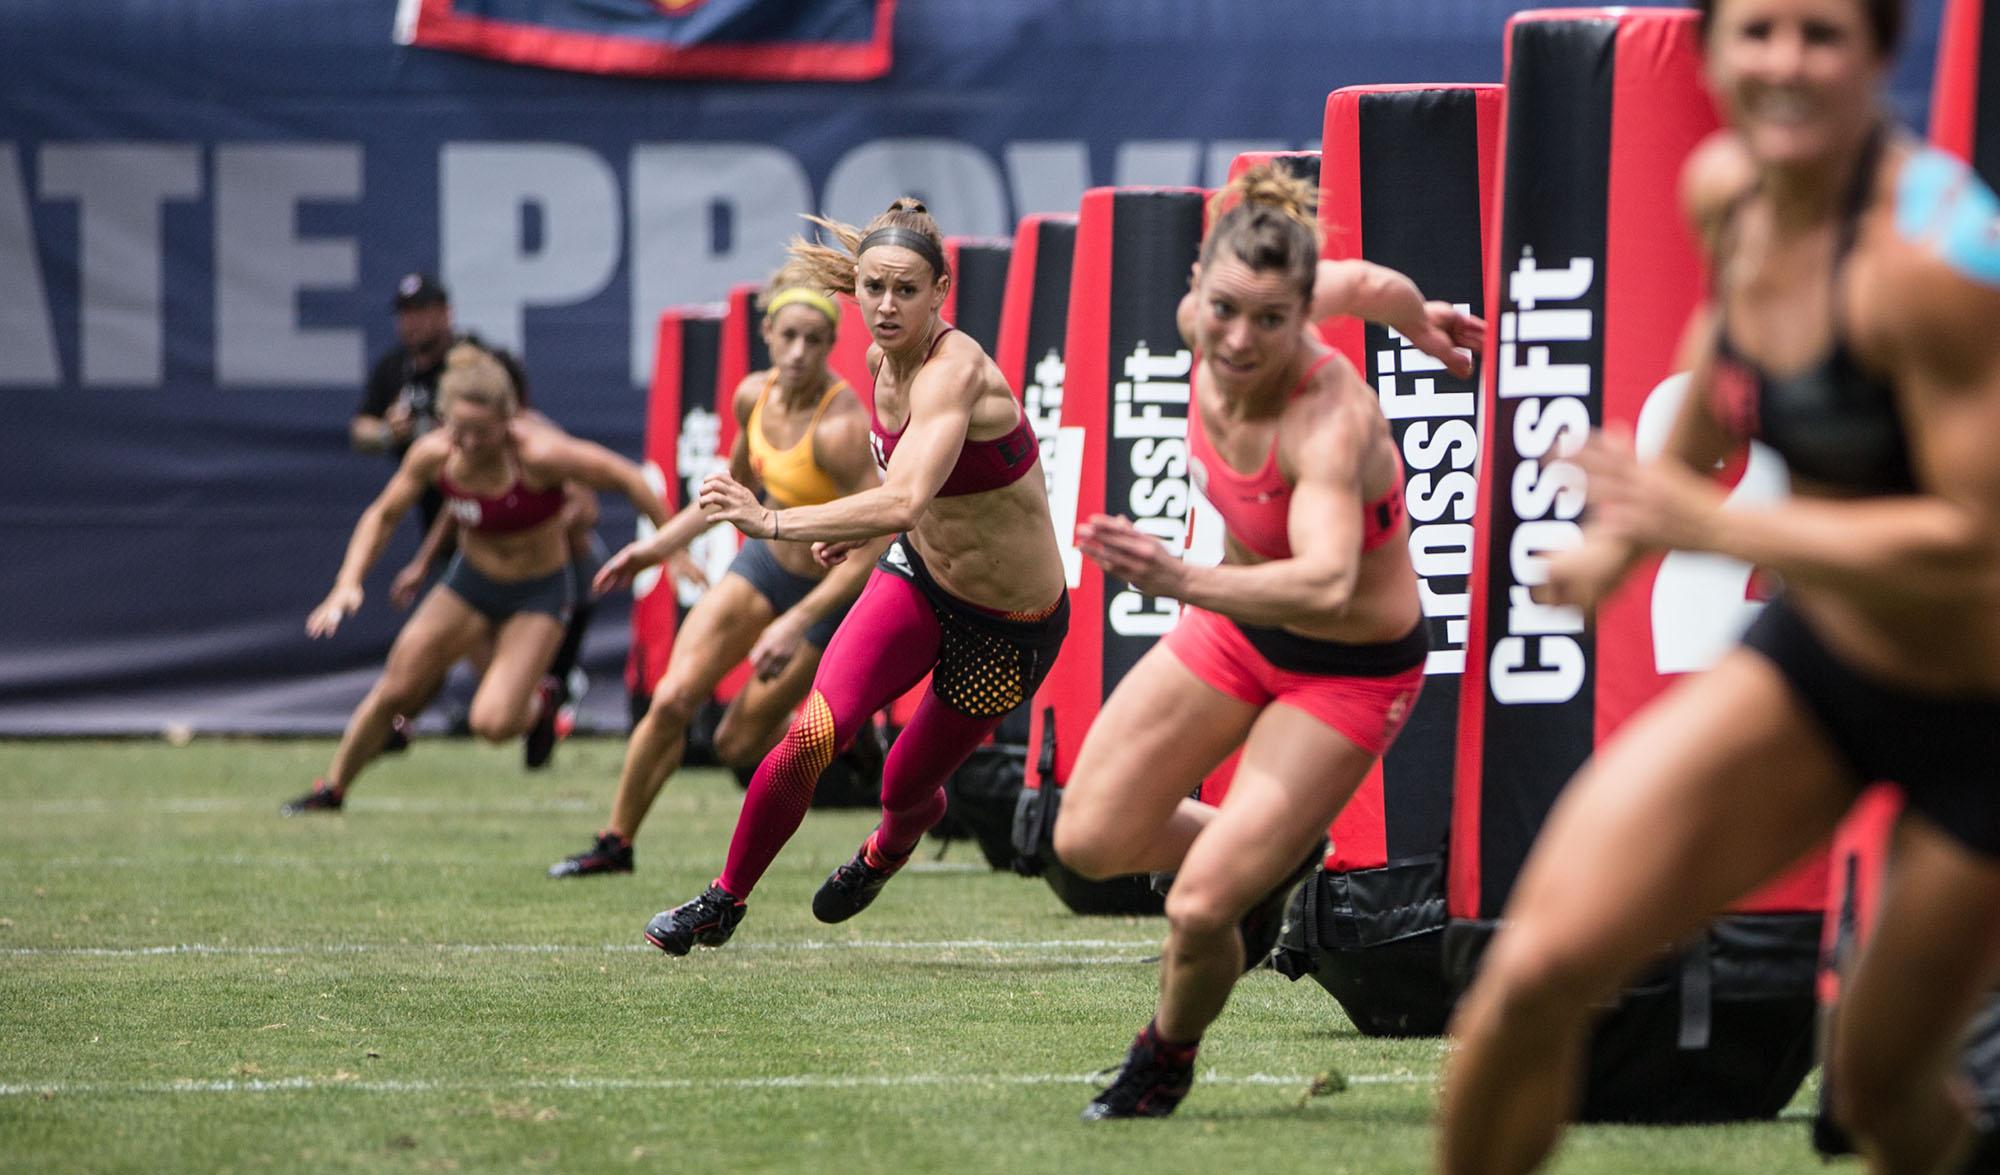 How to Watch CrossFit Games 2018 Without Cable, Live Stream Online